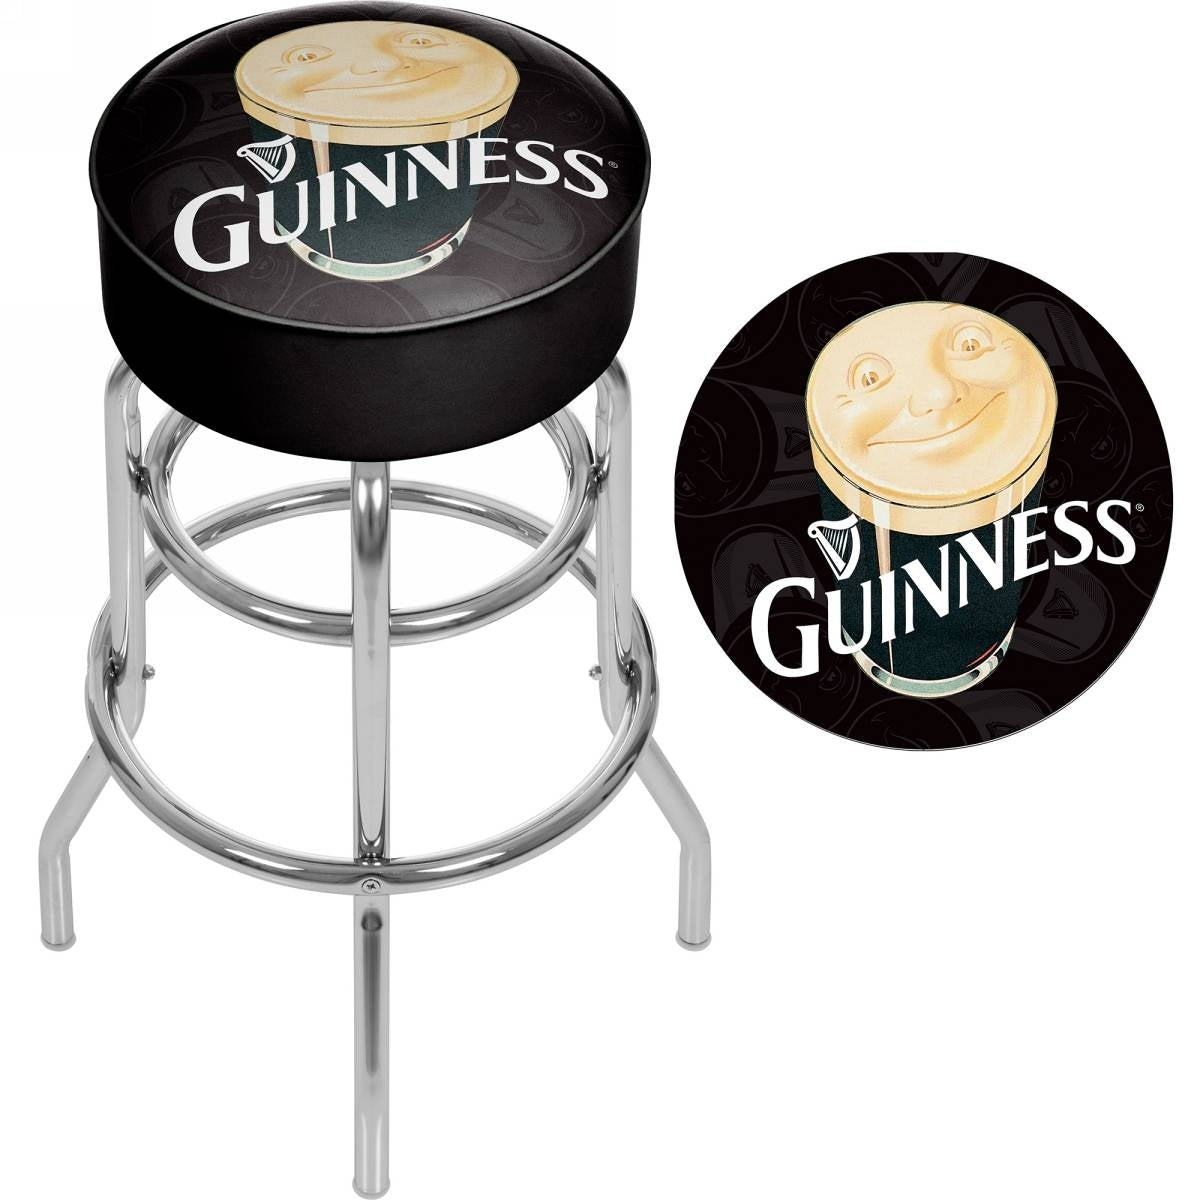 A Guinness Padded Swivel Bar Stool - Smiling Pint with a Guinness logo on it, perfect for a game room or garage.